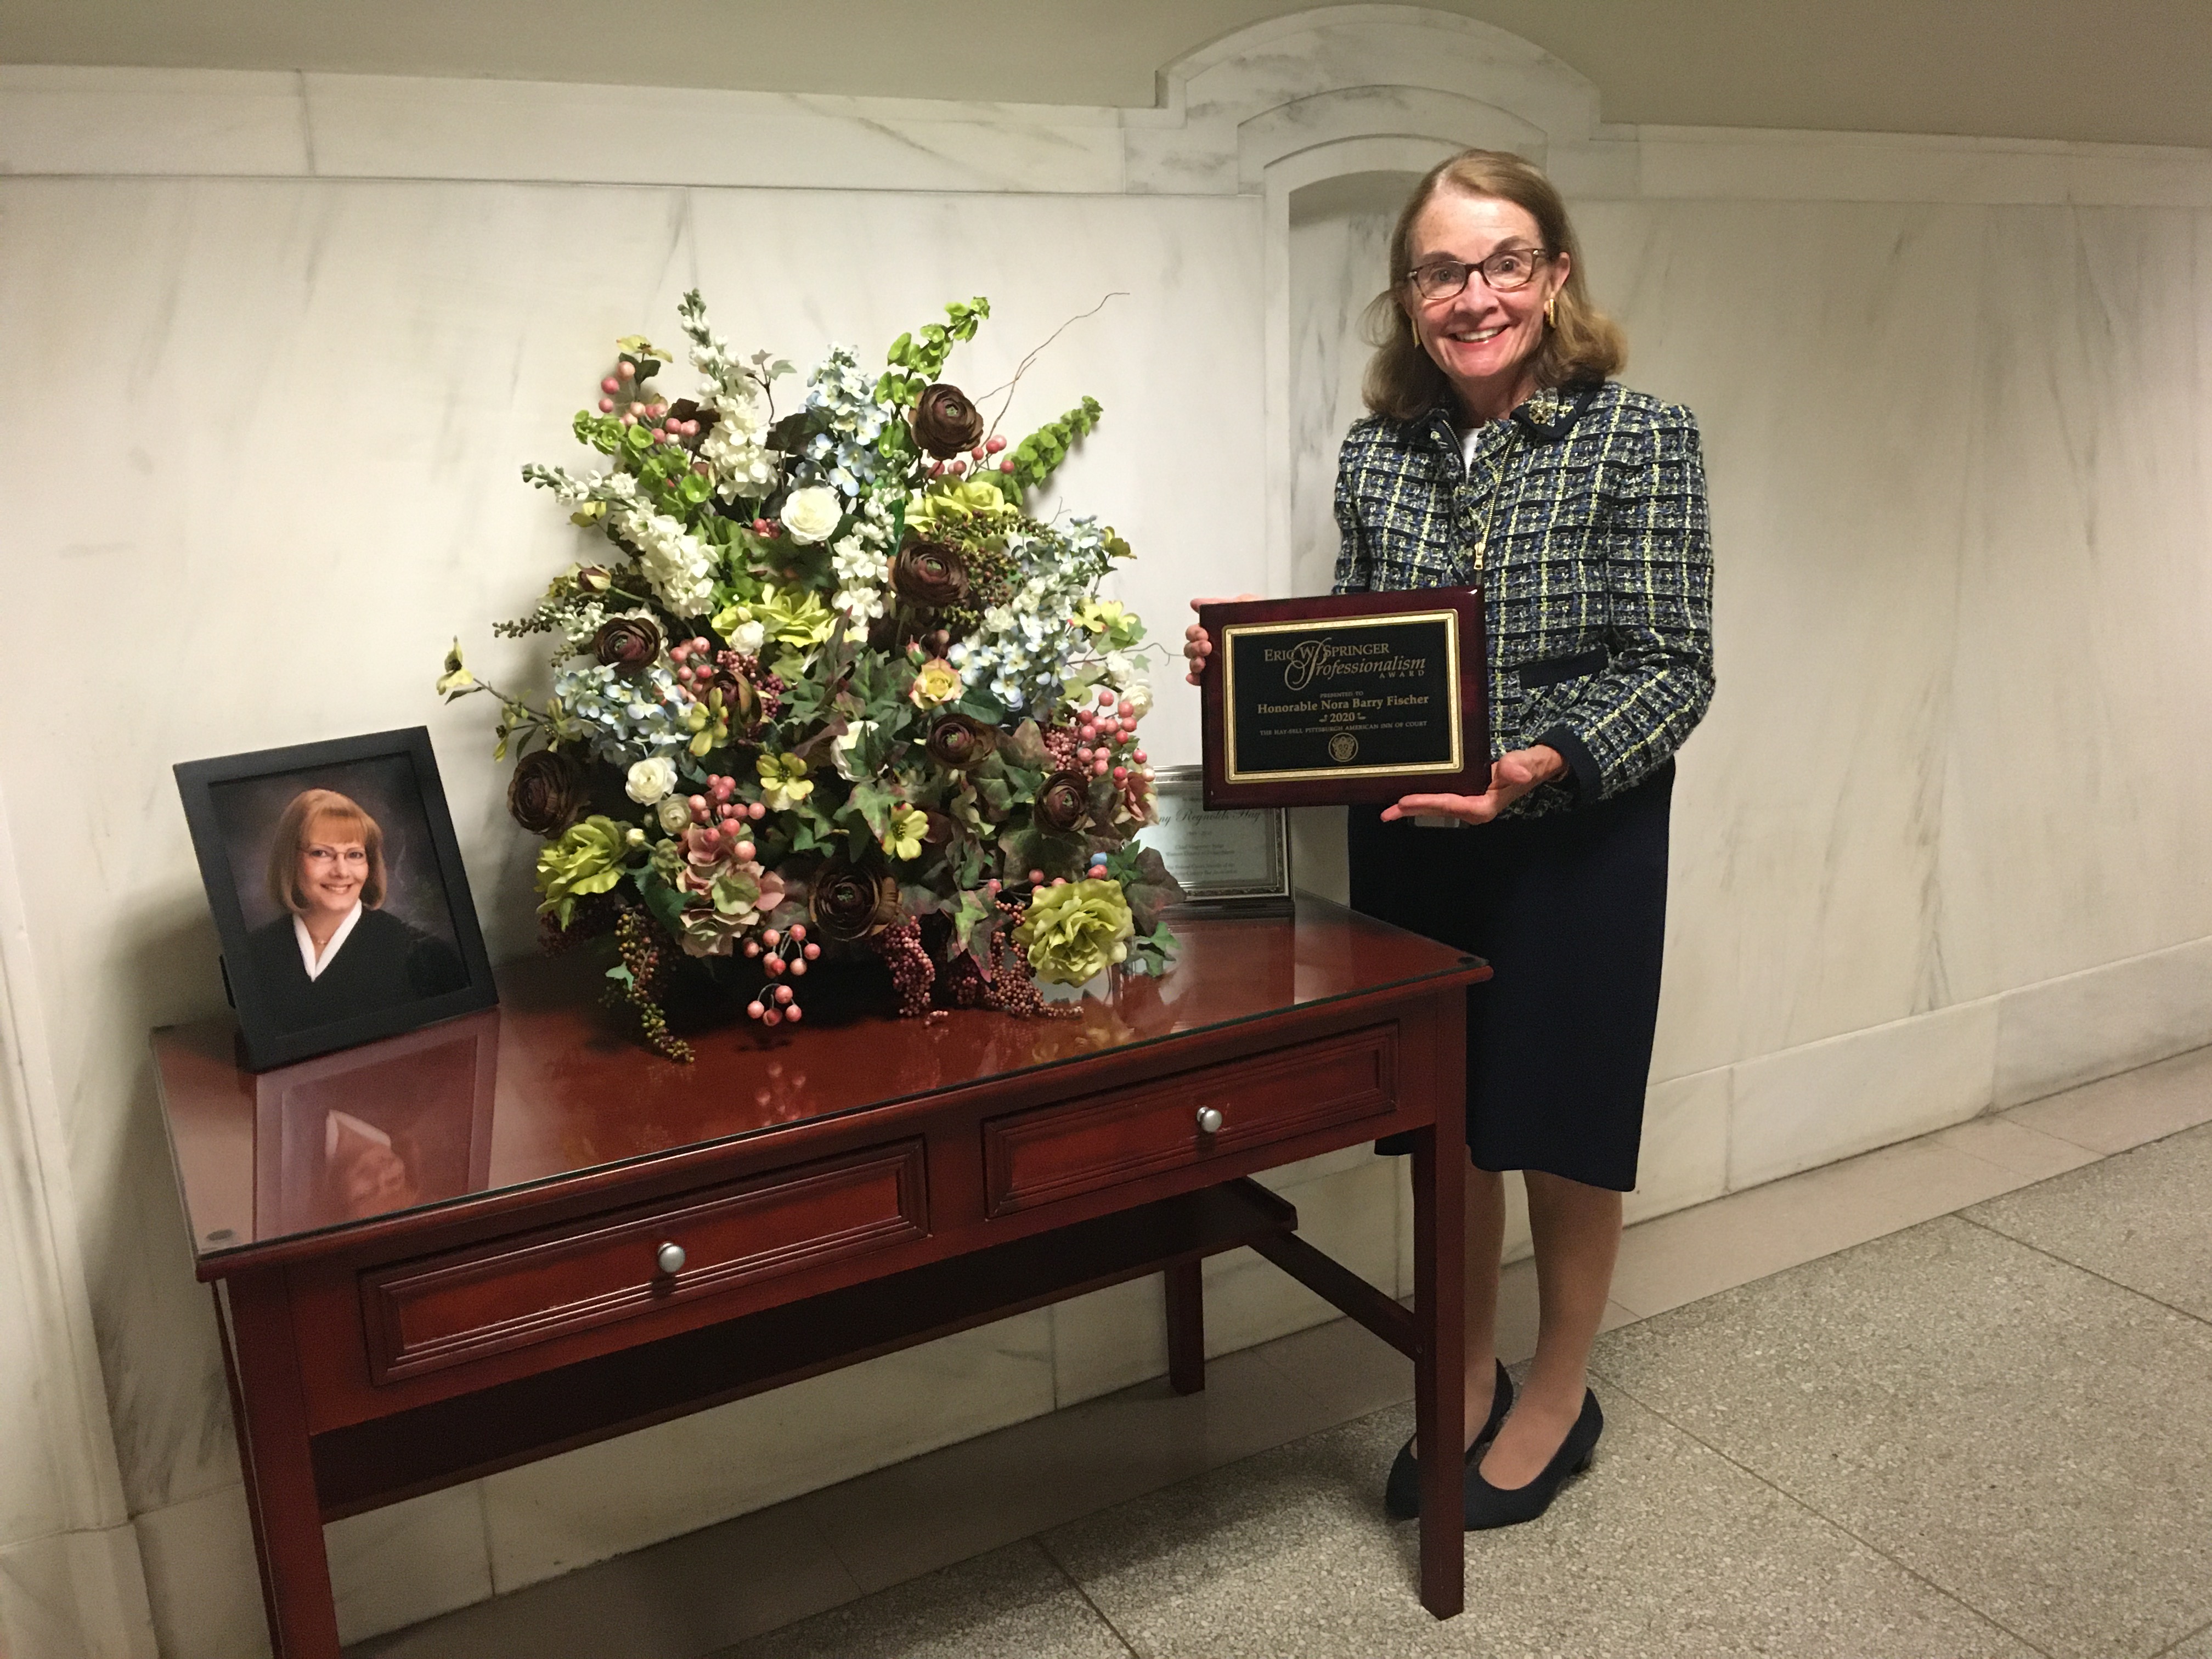 The Hay-Sell Pittsburgh American Inn of Court presented The Honorable Nora Barry Fischer with the Eric W. Springer Professionalism Award for 2020 in July at the U.S. District Court for the Western District of Pennsylvania.  The Springer Award was created to honor Eric W. Springer, who in 2006 was the former W. Edward Sell American Inn of Court’s first recipient of the American Inns of Court Professionalism Award for the Third Circuit. The award honors a member of the Hay-Sell Inn whose life and practice display sterling character, unquestioned integrity, and an ongoing dedication to the highest standards of the legal profession and the rule of law.   Judge Fischer, a Master of the Bench in the Inn and its Counselor, was recognized for inspiring and improving the legal profession by promoting the highest standards of ethics, civility, and professionalism, and by giving back to the profession by mentoring young lawyers and law students.  Fischer chose to be presented with the award at the memorial set up to honor the late Amy Reynolds Hay, U.S. Magistrate Judge, a friend who recruited Fischer to the Inn and for whom the Hay-Sell Pittsburgh American Inn of Court also is co-named.